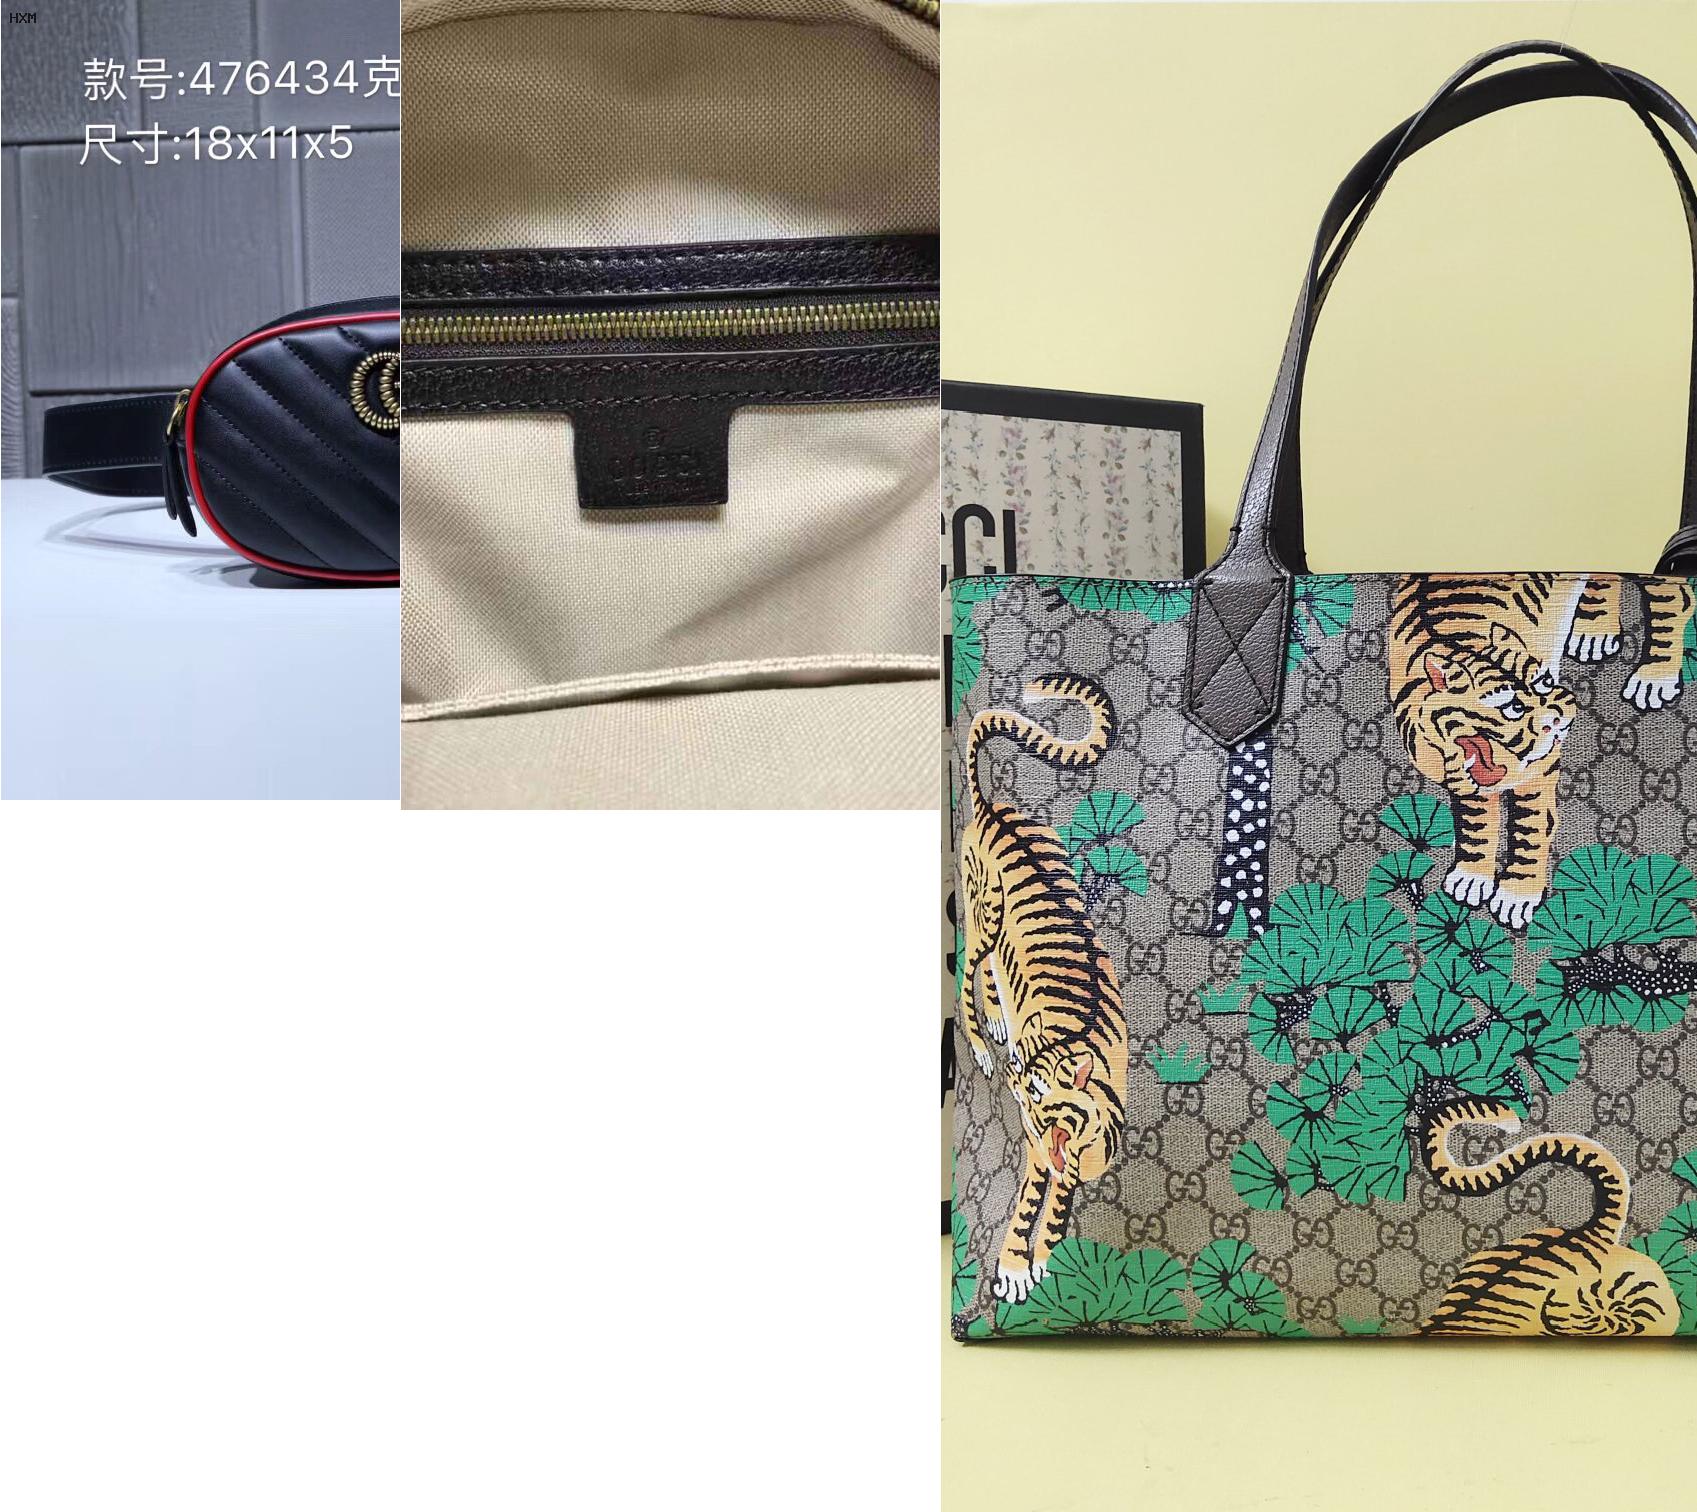 shopping bag gucci outlet